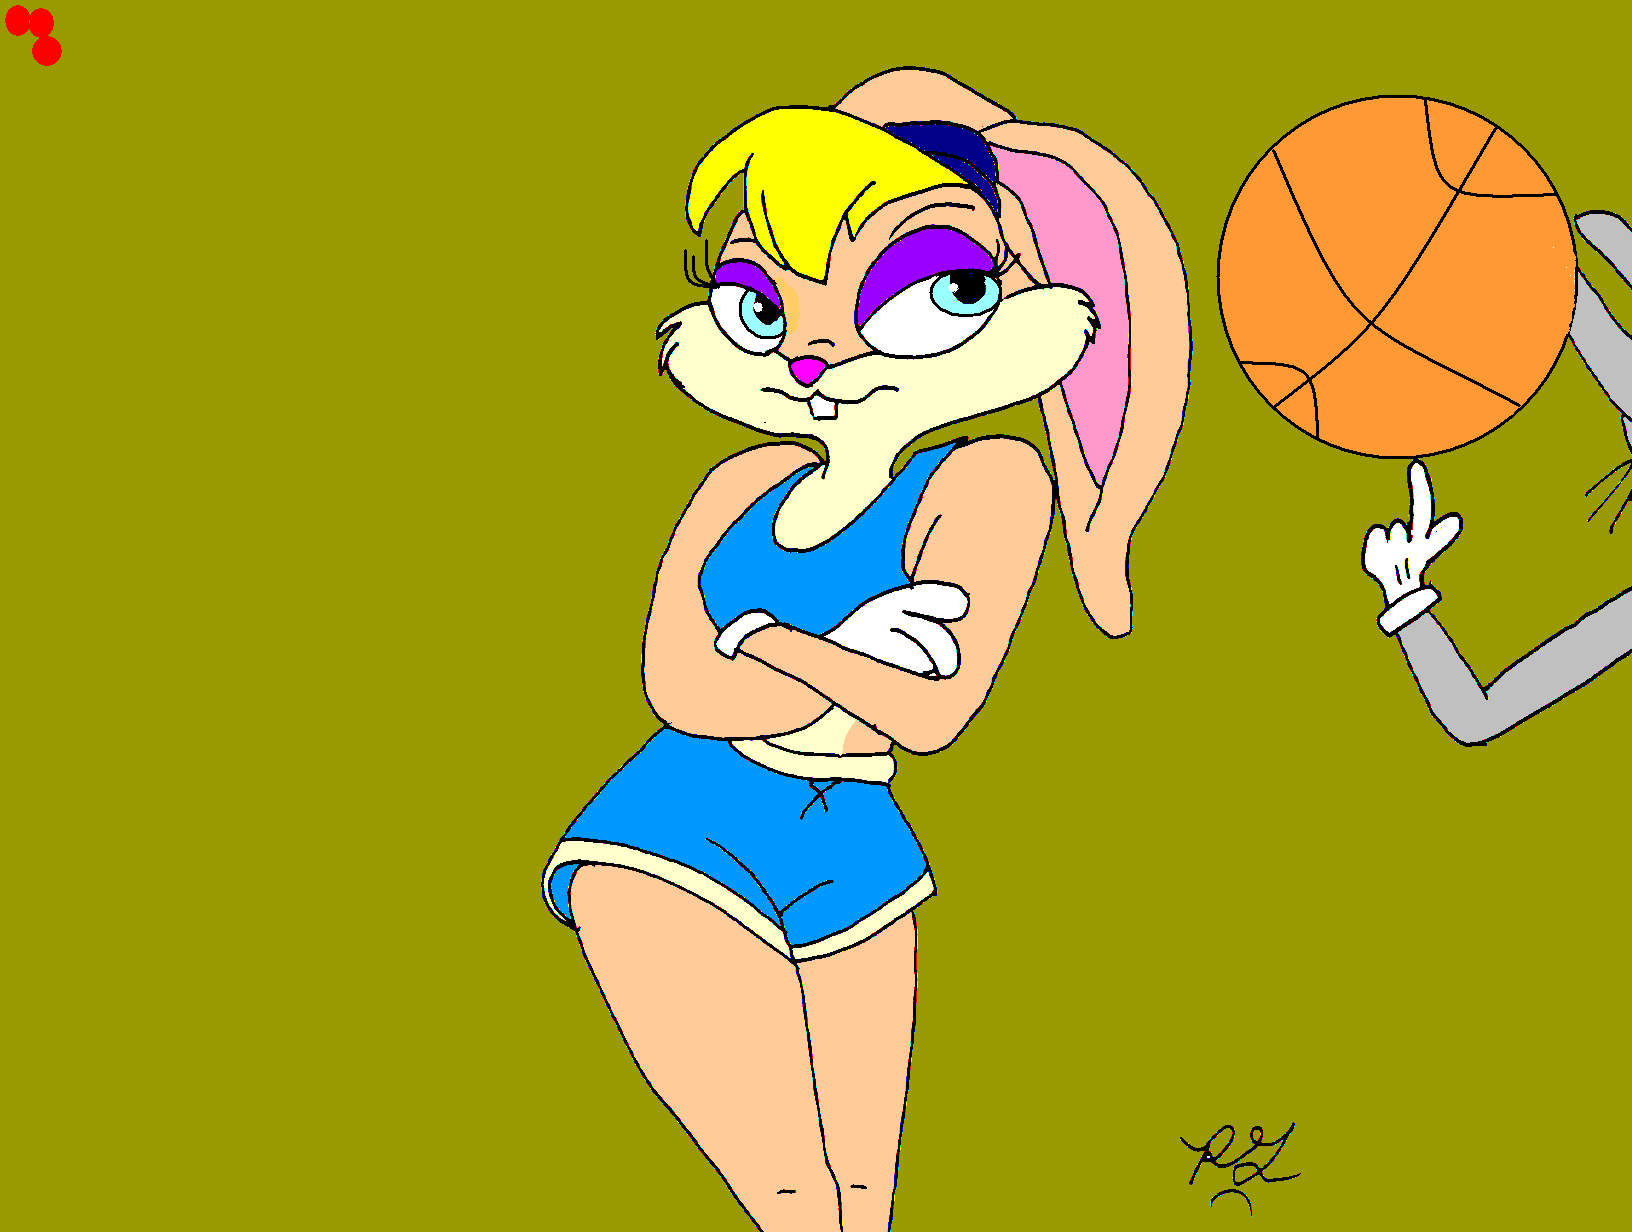 Lola bunny easter egg - 🧡 Every Easter Egg in Space Jam: A New Legacy Trai...